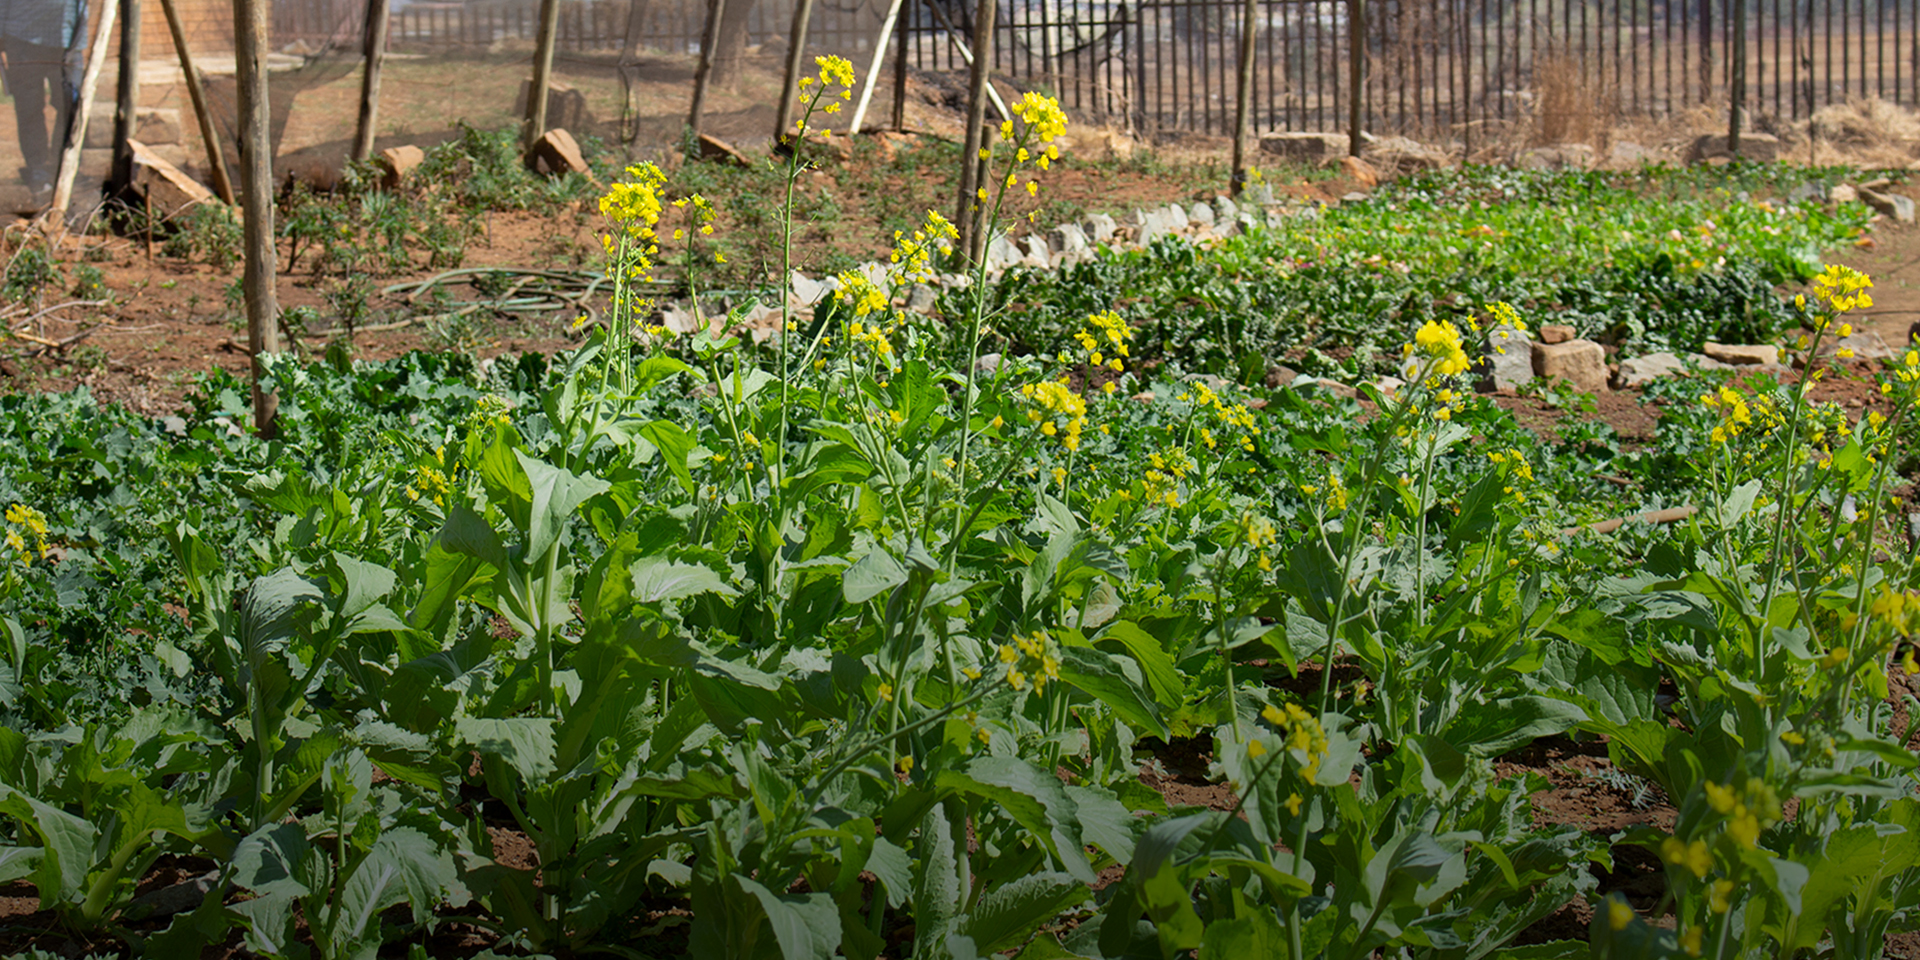 An image of a growing garden with large stems that are budding yellow flowers.